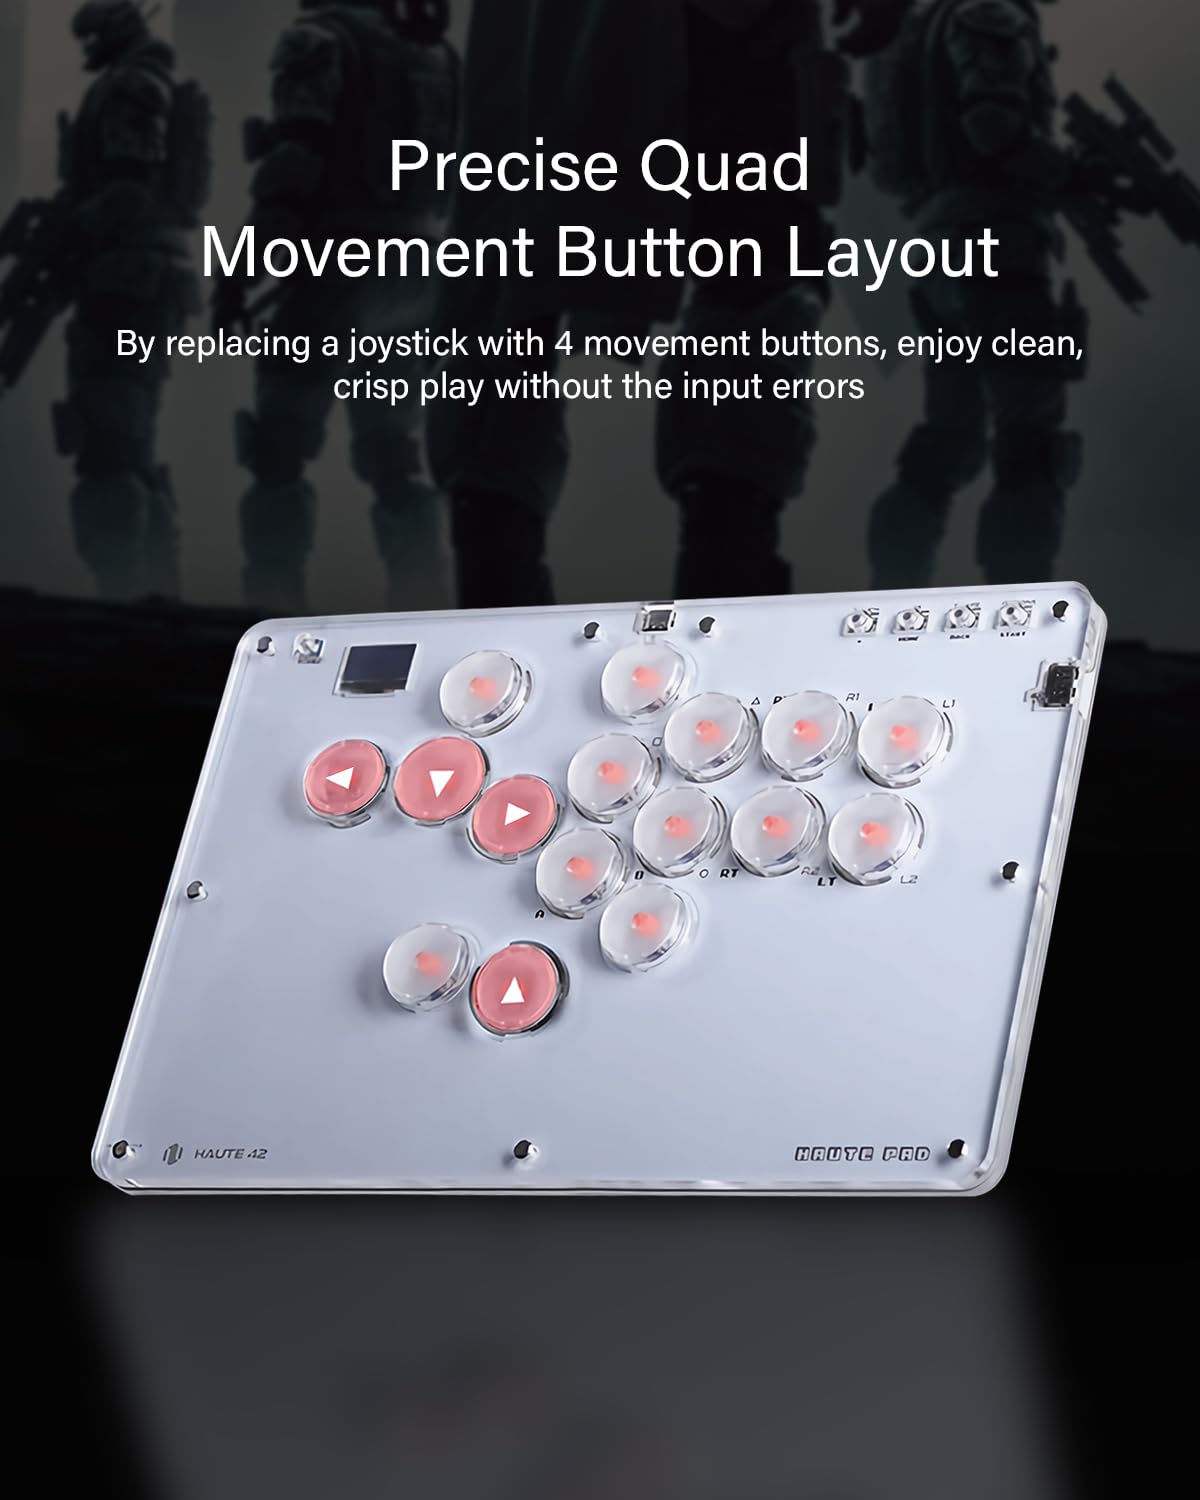 Sehawei Arcade Stick 16Keys All-Button Gamerfinger with Turbo Functions & Custom RGB,Arcade Controller Street Fight for PC/Ps3/Ps4/Switch/Steam Game Keyboard-Supports Hot Swap & SOCD